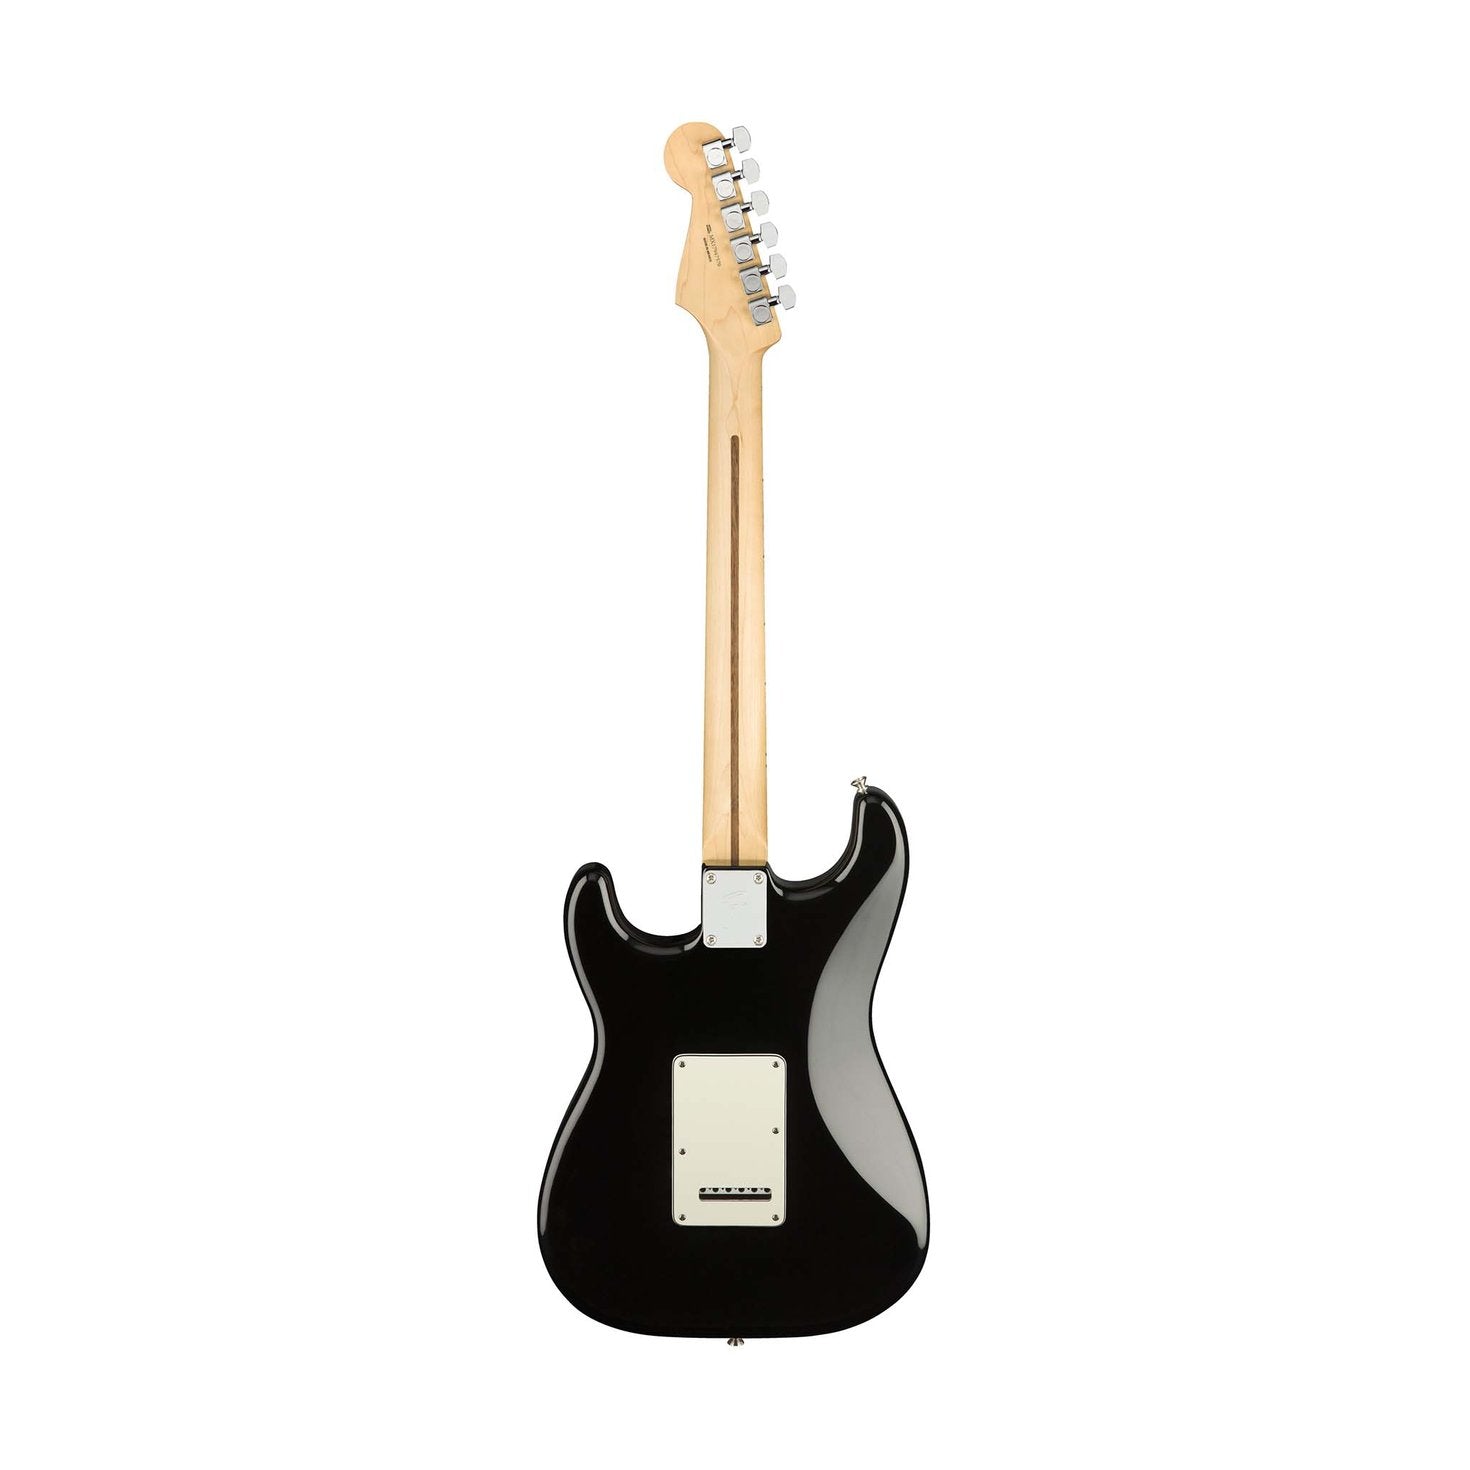 Fender Player Stratocaster Electric Guitar, Maple FB, Black, FENDER, ELECTRIC GUITAR, fender-eletric-guitar-f03-014-4502-506, ZOSO MUSIC SDN BHD